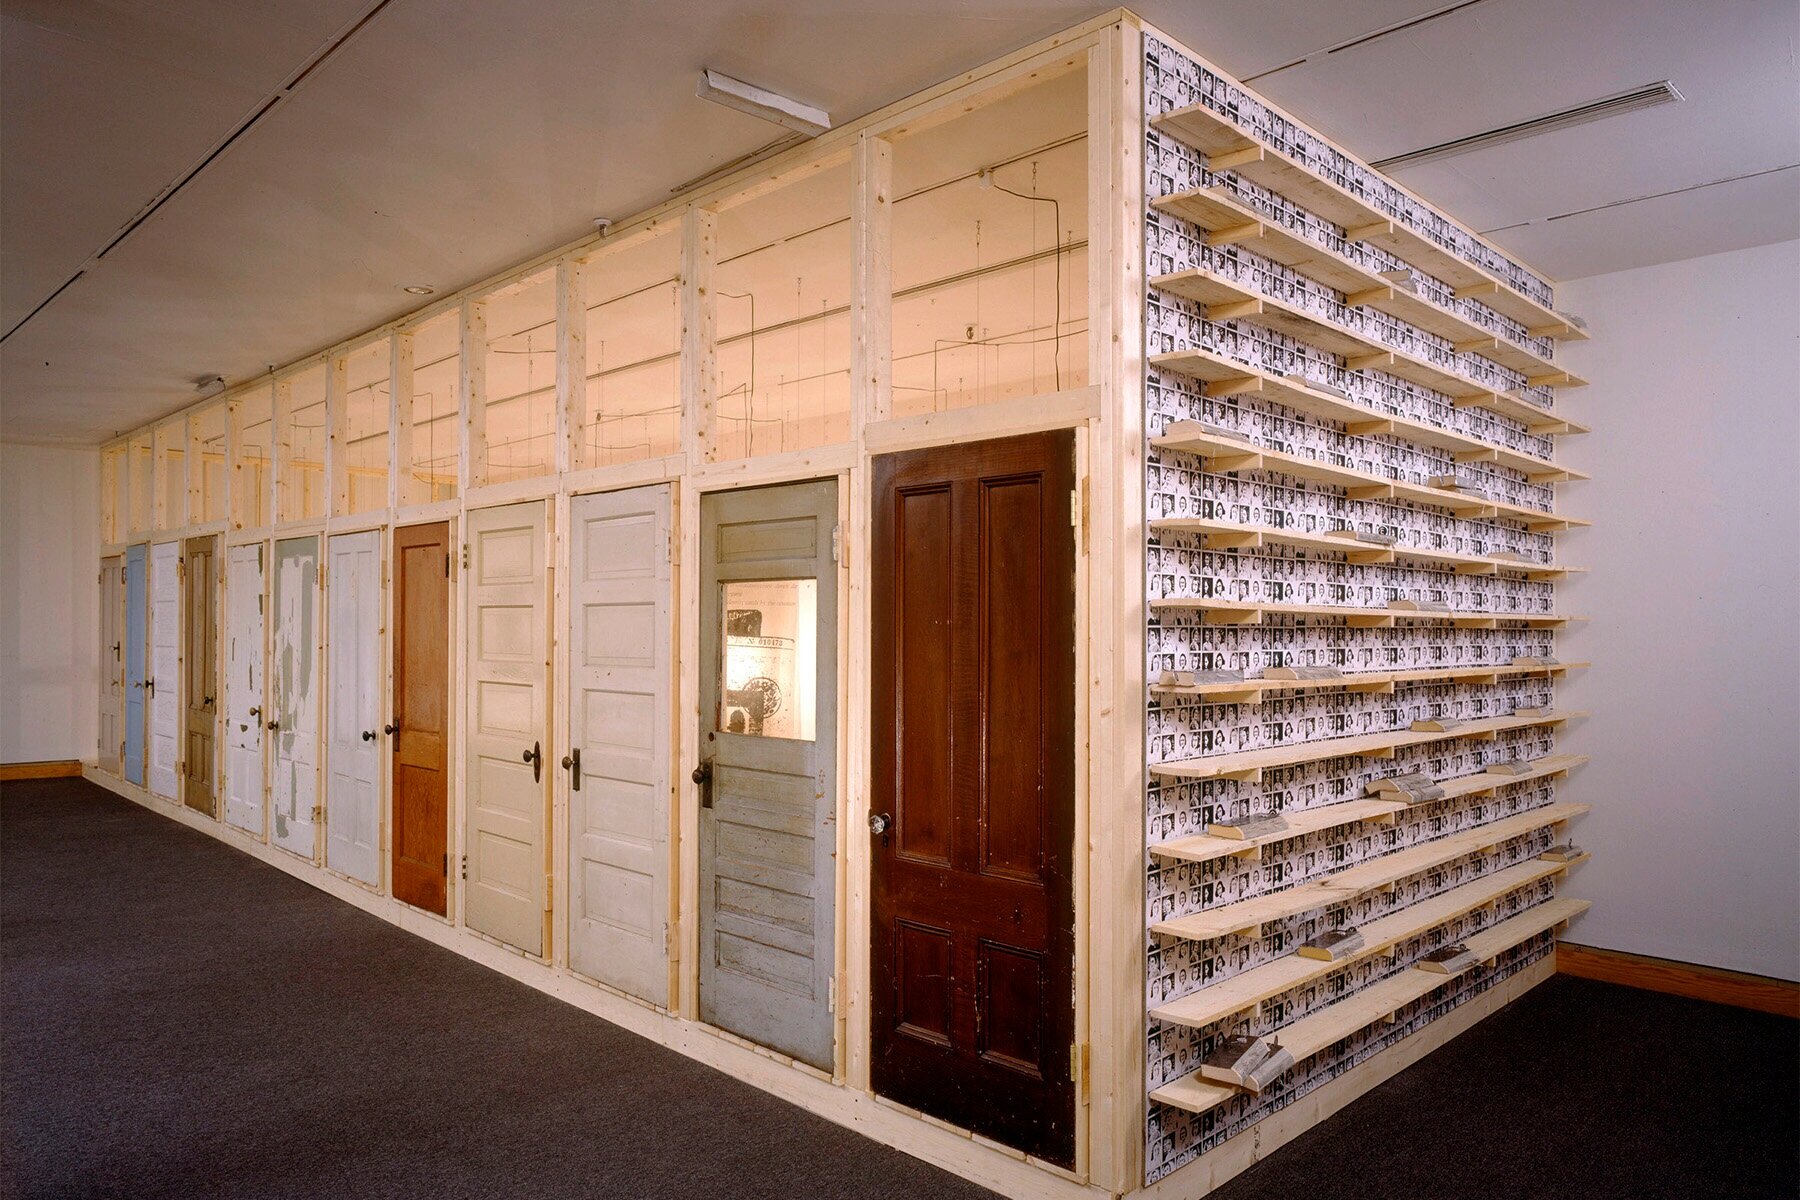   Anne Frank Project: Partial Index , installation view, Portland Museum of Art, 1994 